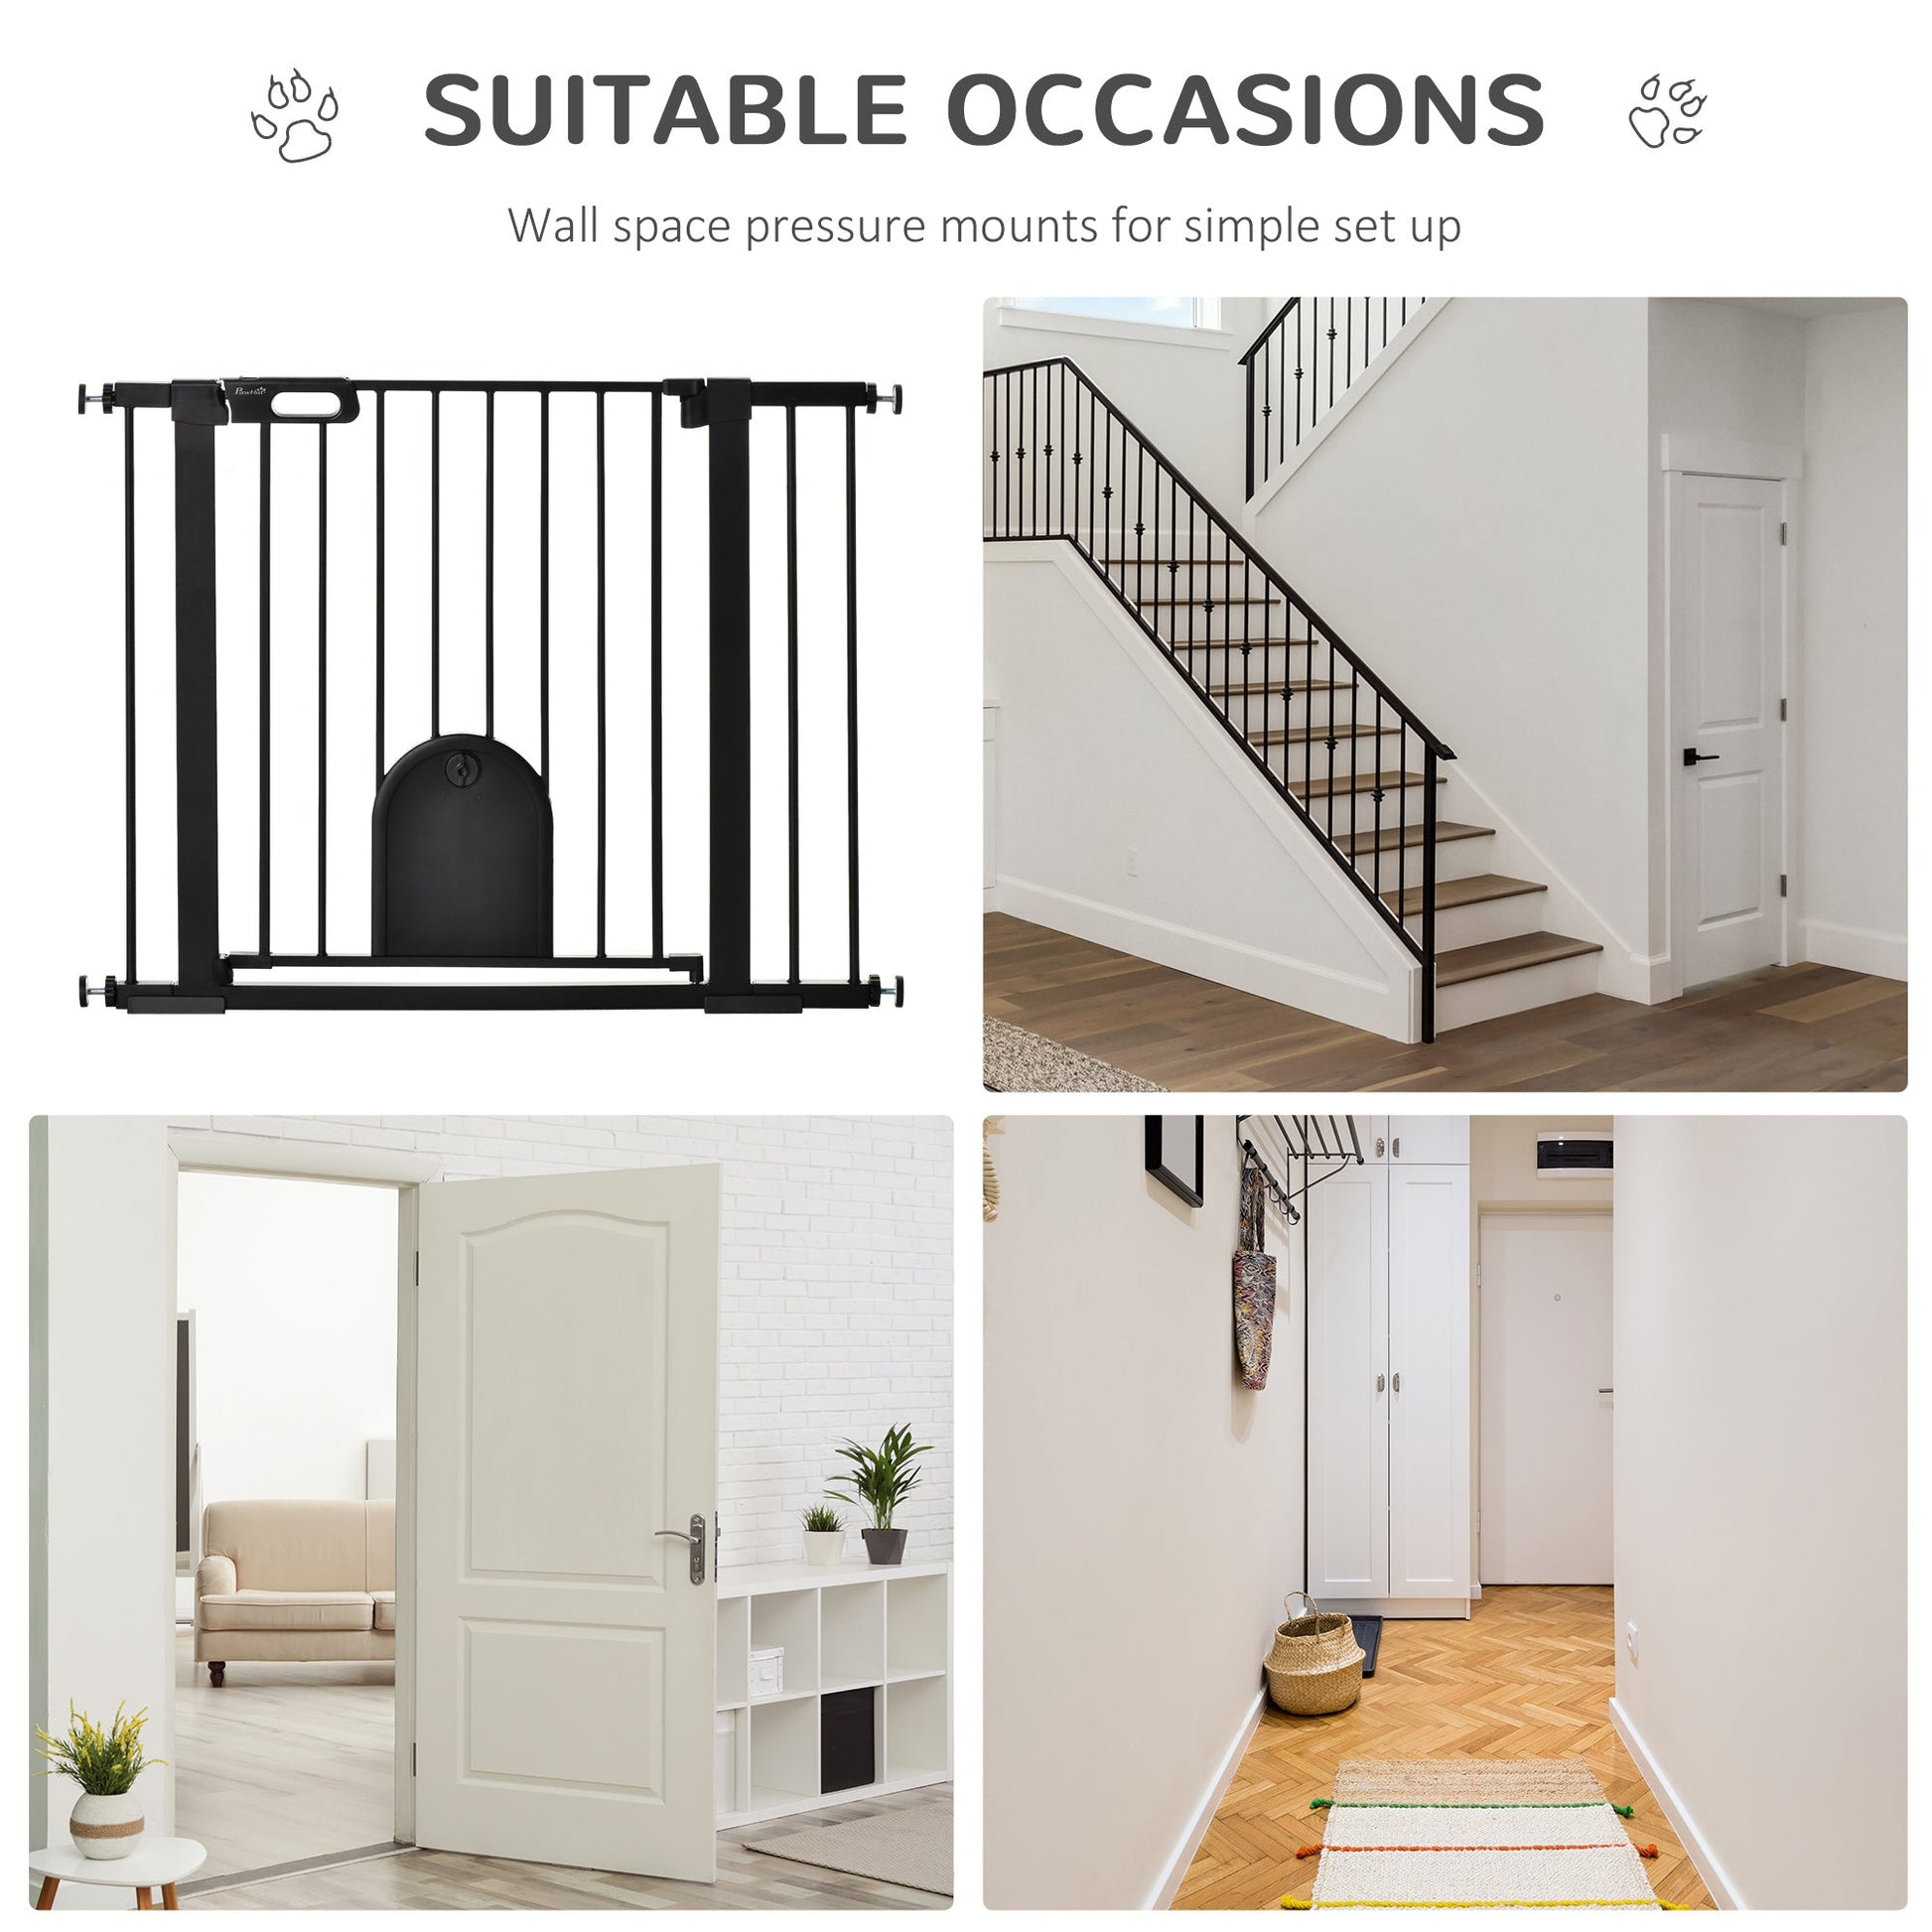 30"-41" Extra Wide Pet Gate with Small Door, Dog Gate with Cat Door, Safety Gate Barrier, Stair Pressure Fit, w/ Auto Close, Double Locking, for Doorways, Hallways, Extensions Kit, Black at Gallery Canada